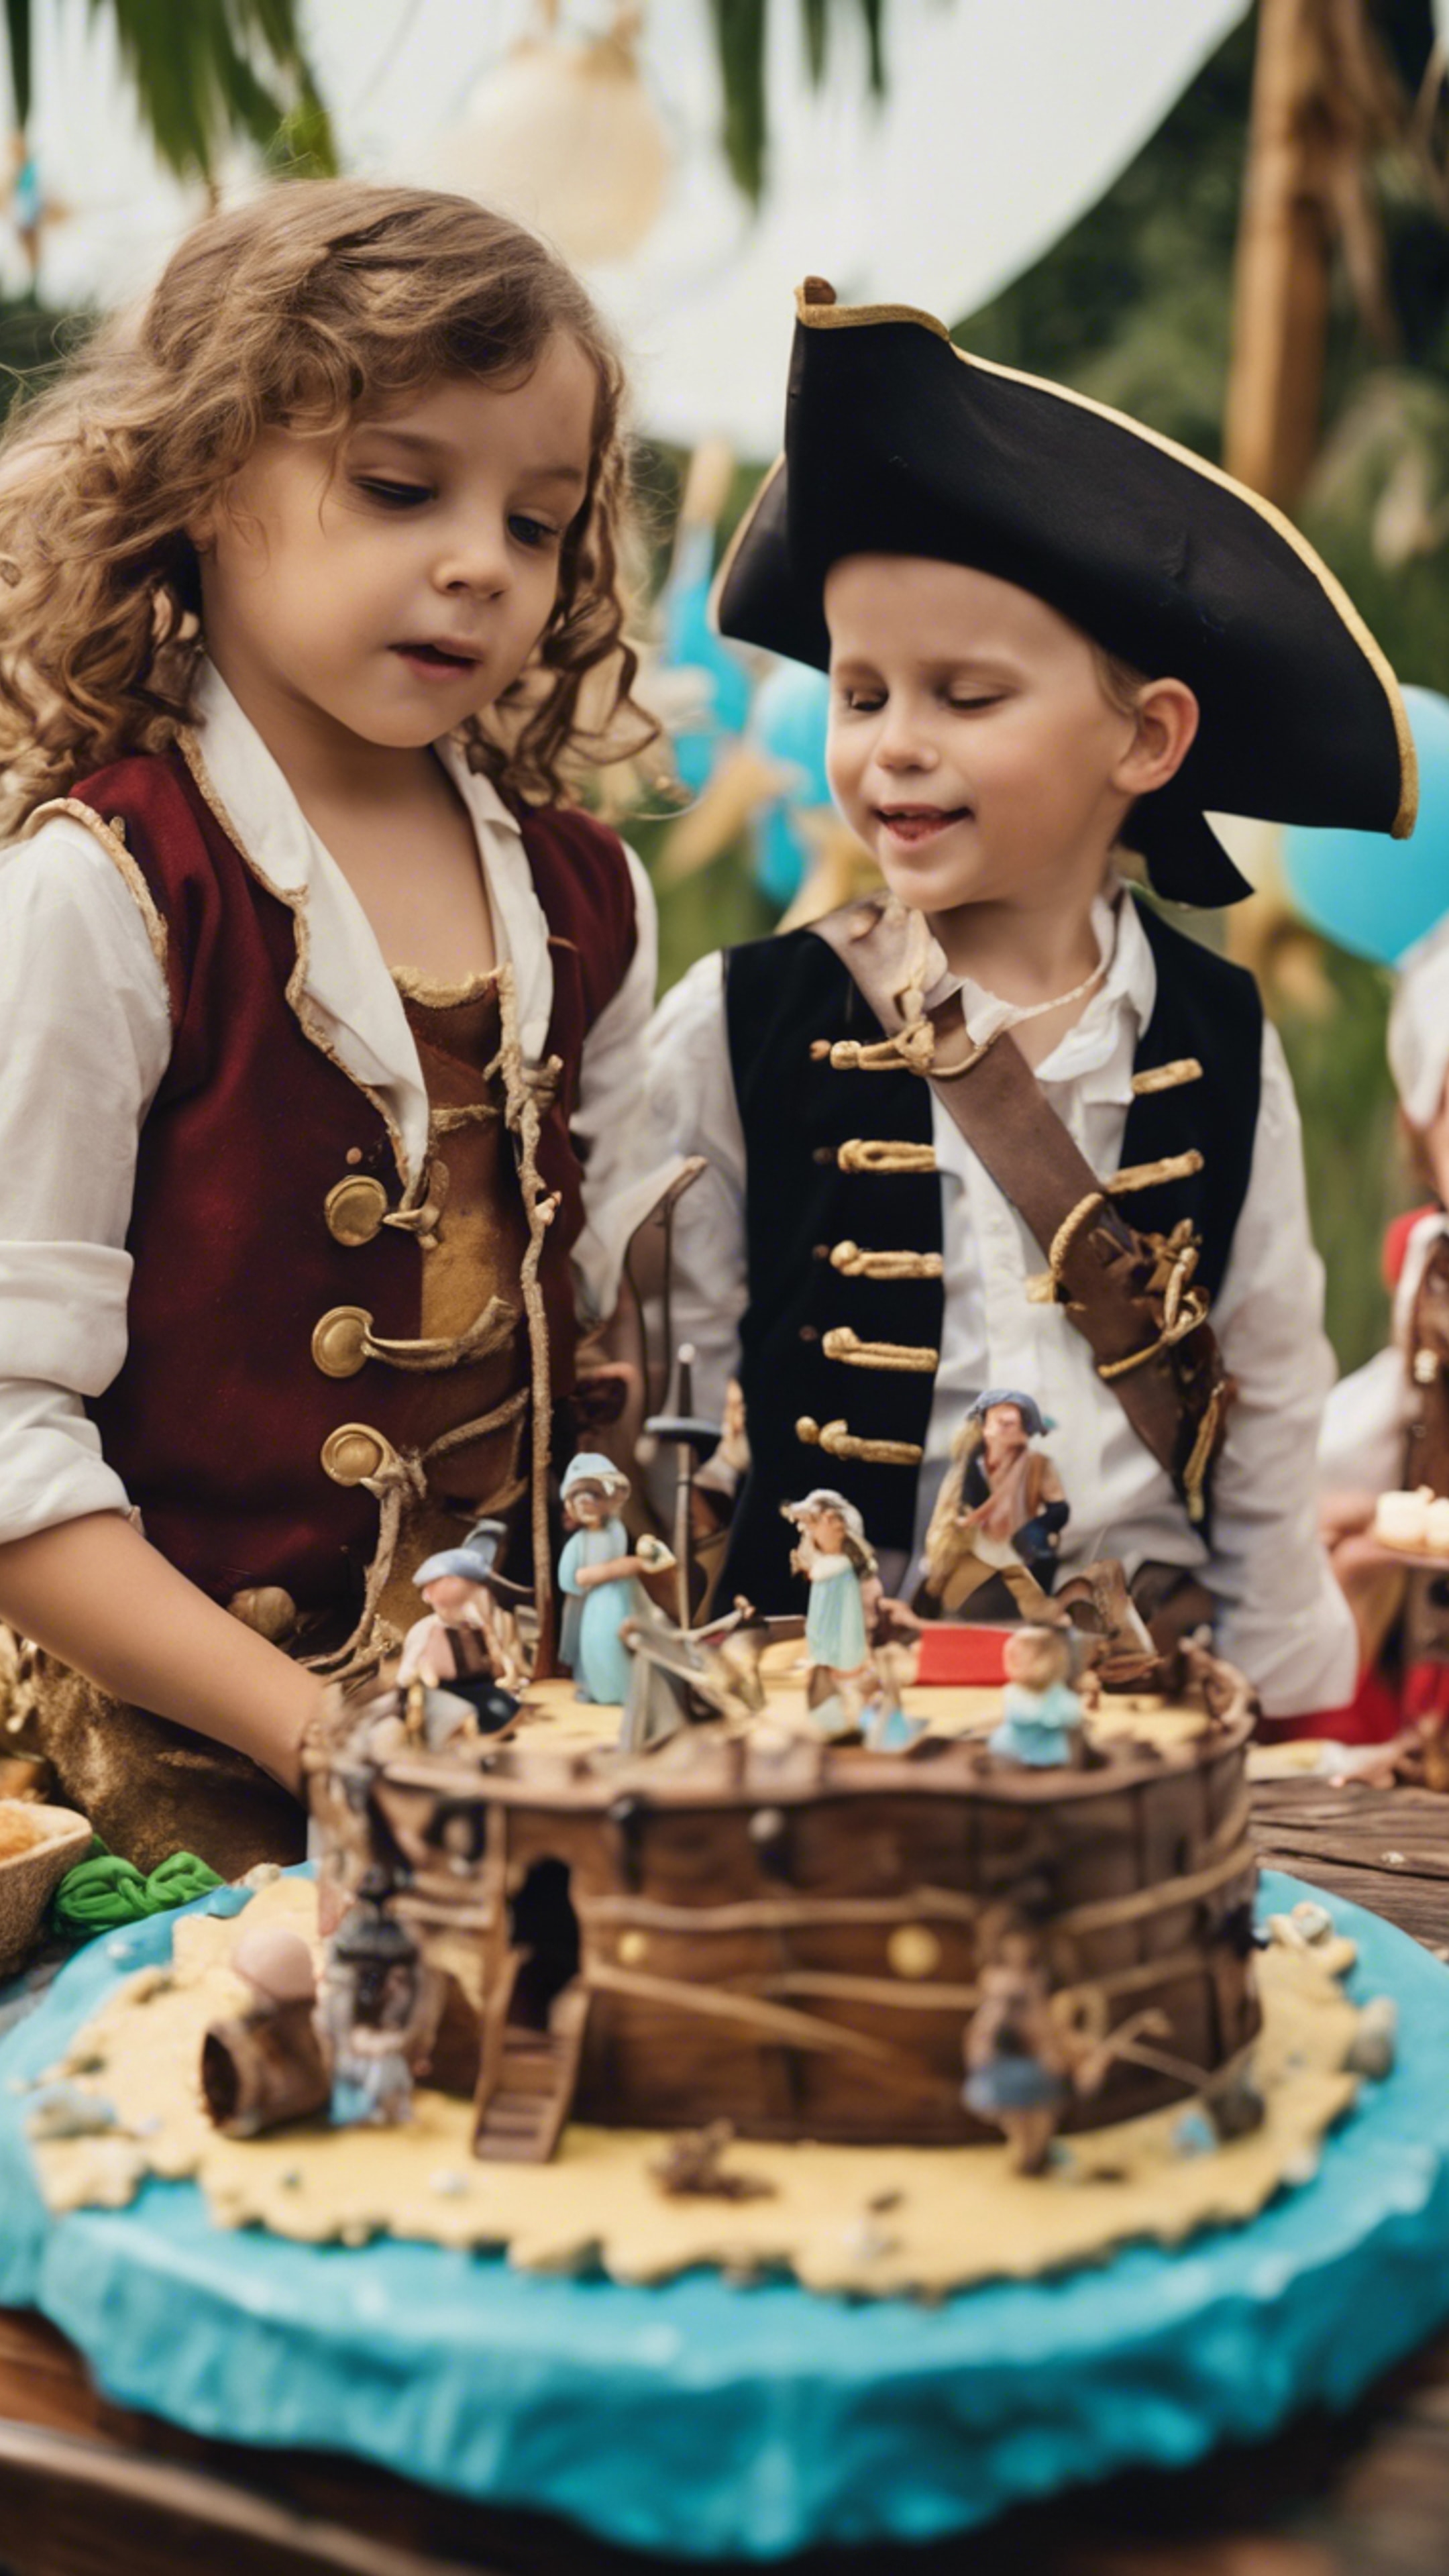 Children's pirate-themed birthday party with a treasure map, pirate ship cake and kids dressed as pirates. ផ្ទាំង​រូបភាព[fc1a6e05b86643309d7a]